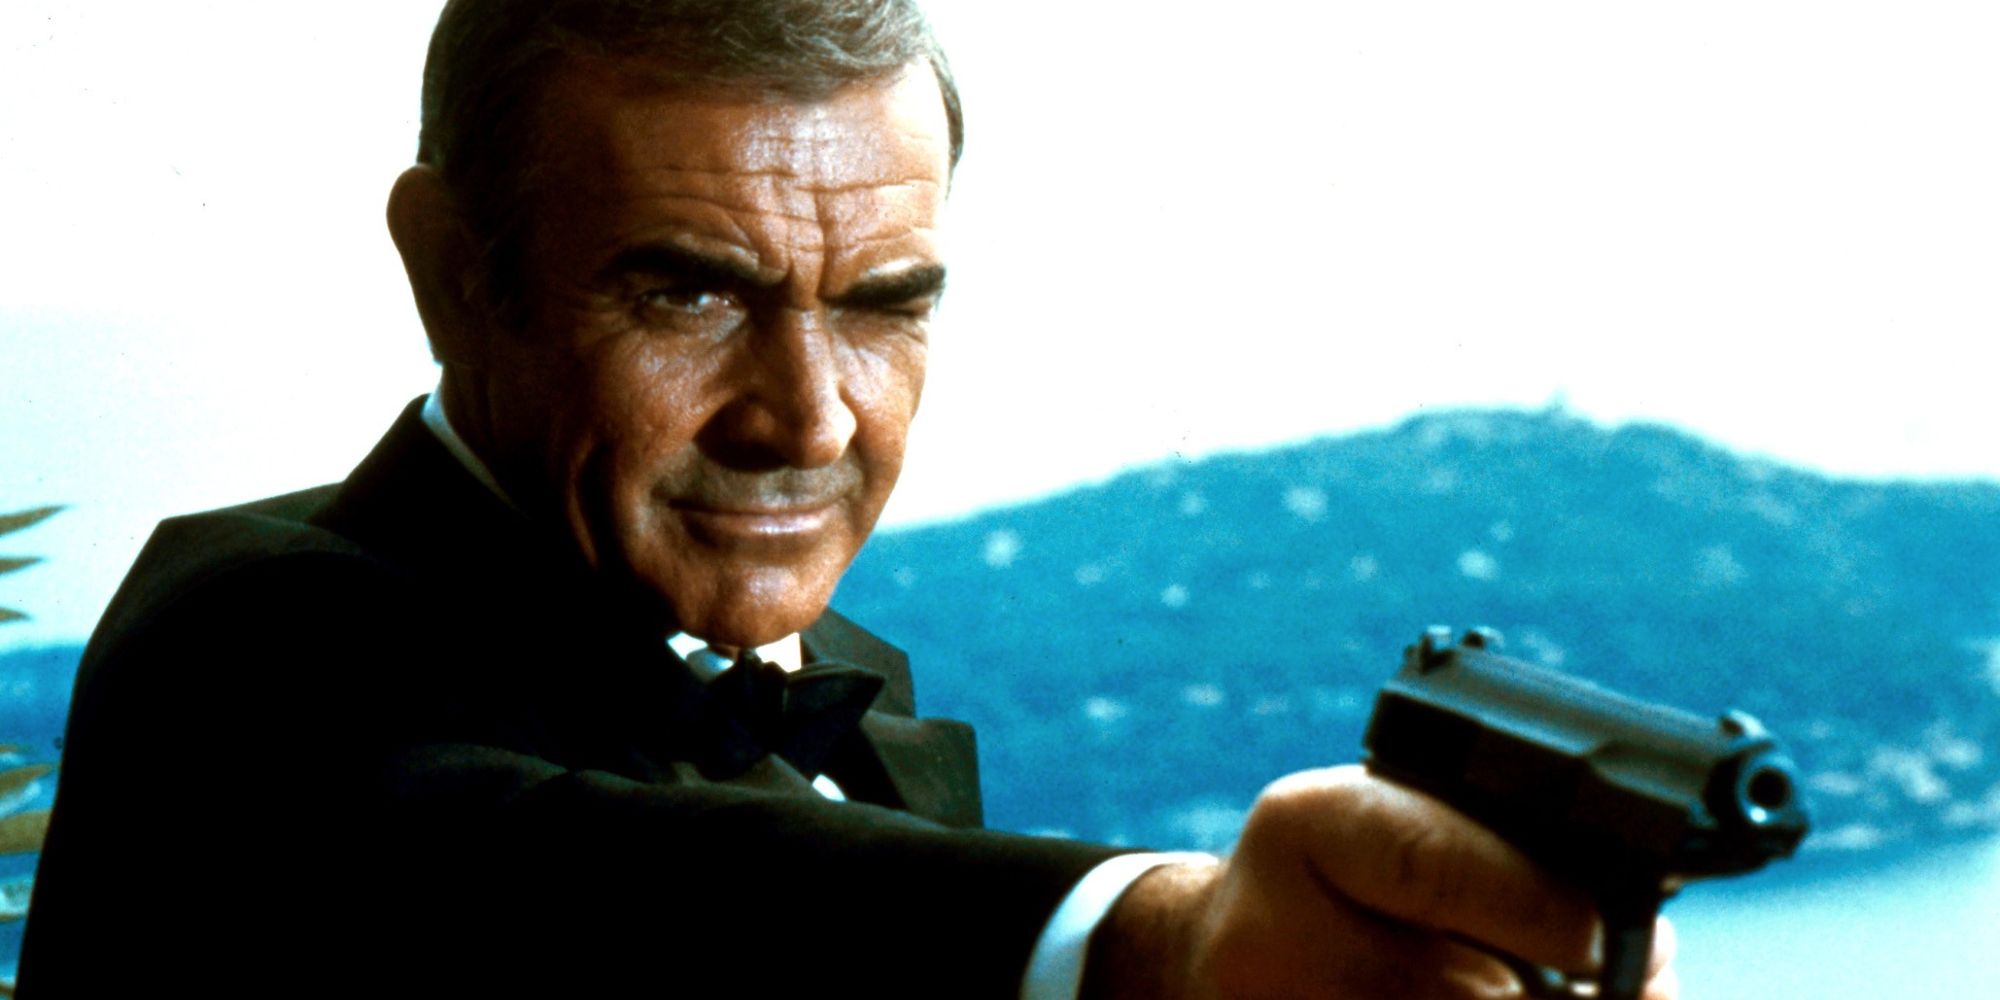 Sean Connery pointing a gun as James Bond in Never Say Never Again